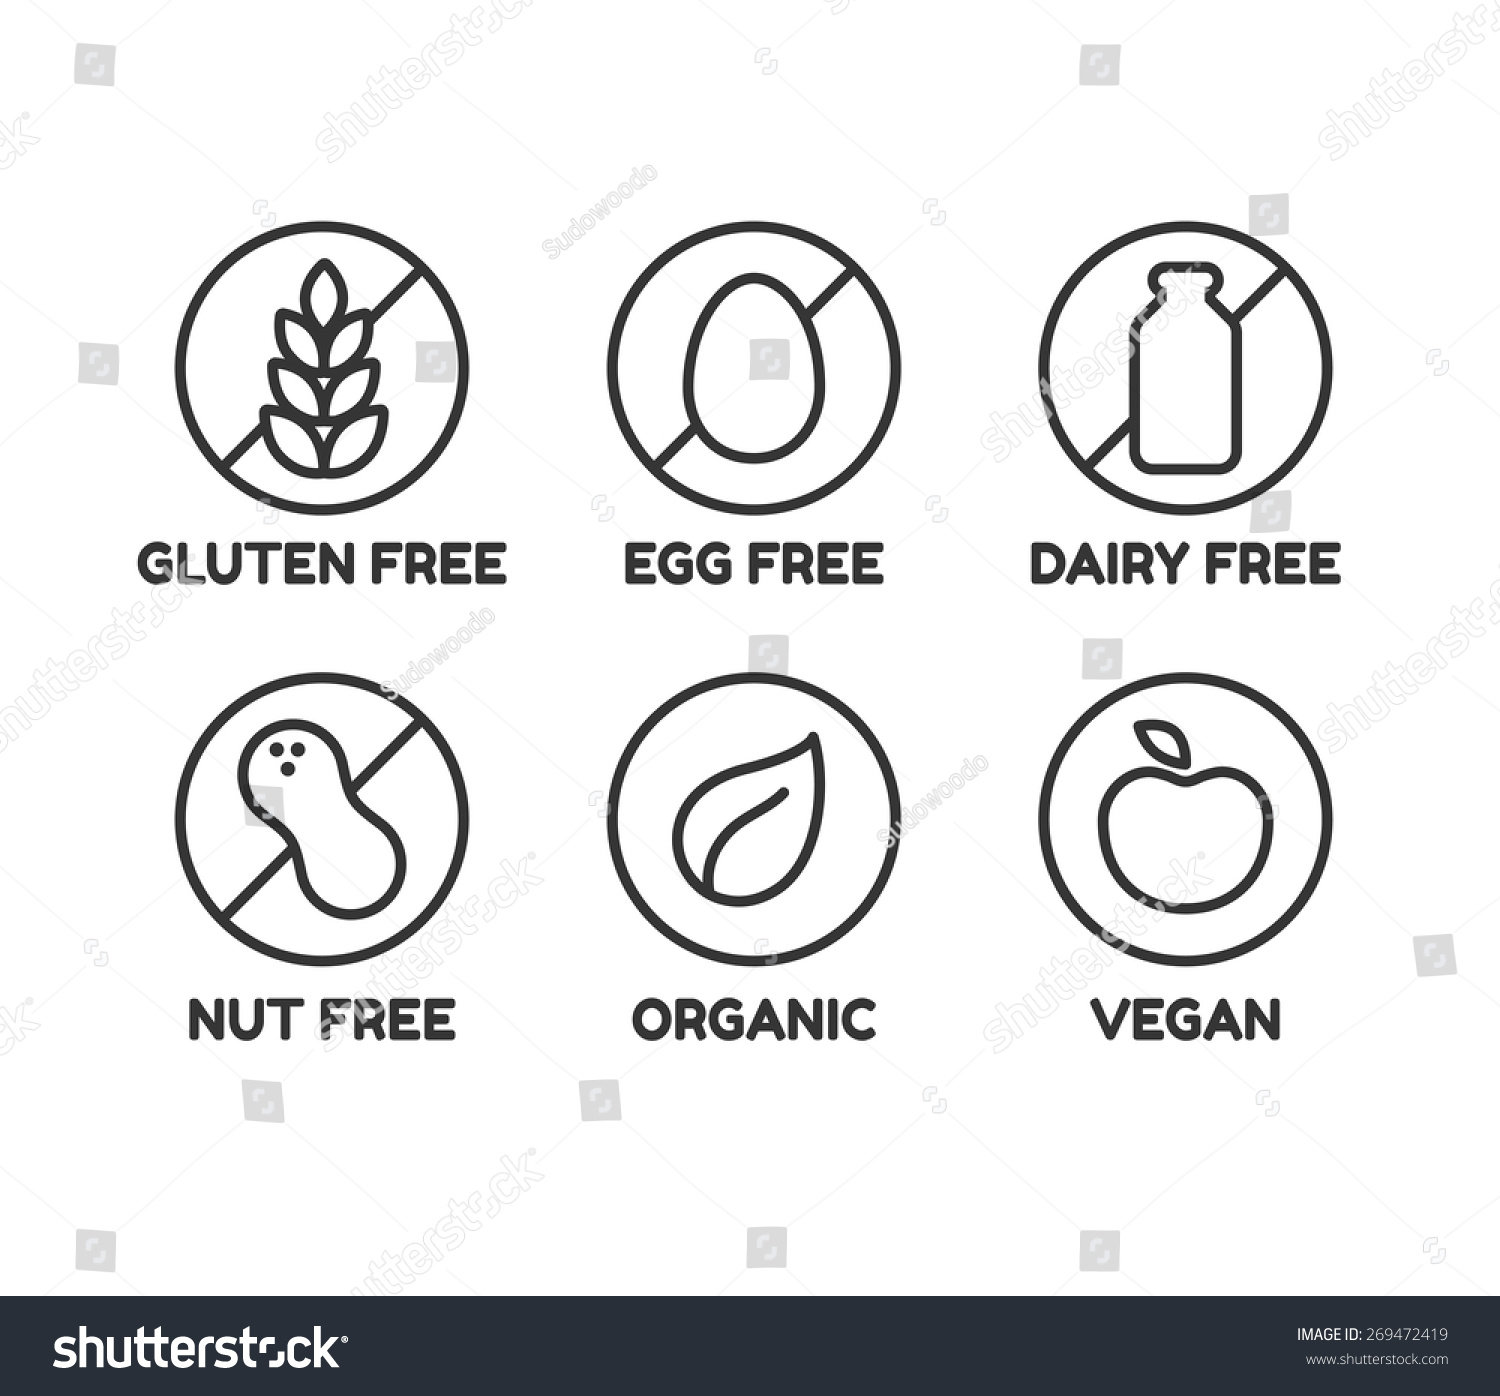 Set of icons illustrating absence of common food allergens (gluten, dairy, egg, nuts) plus vegan and organic signs. #269472419